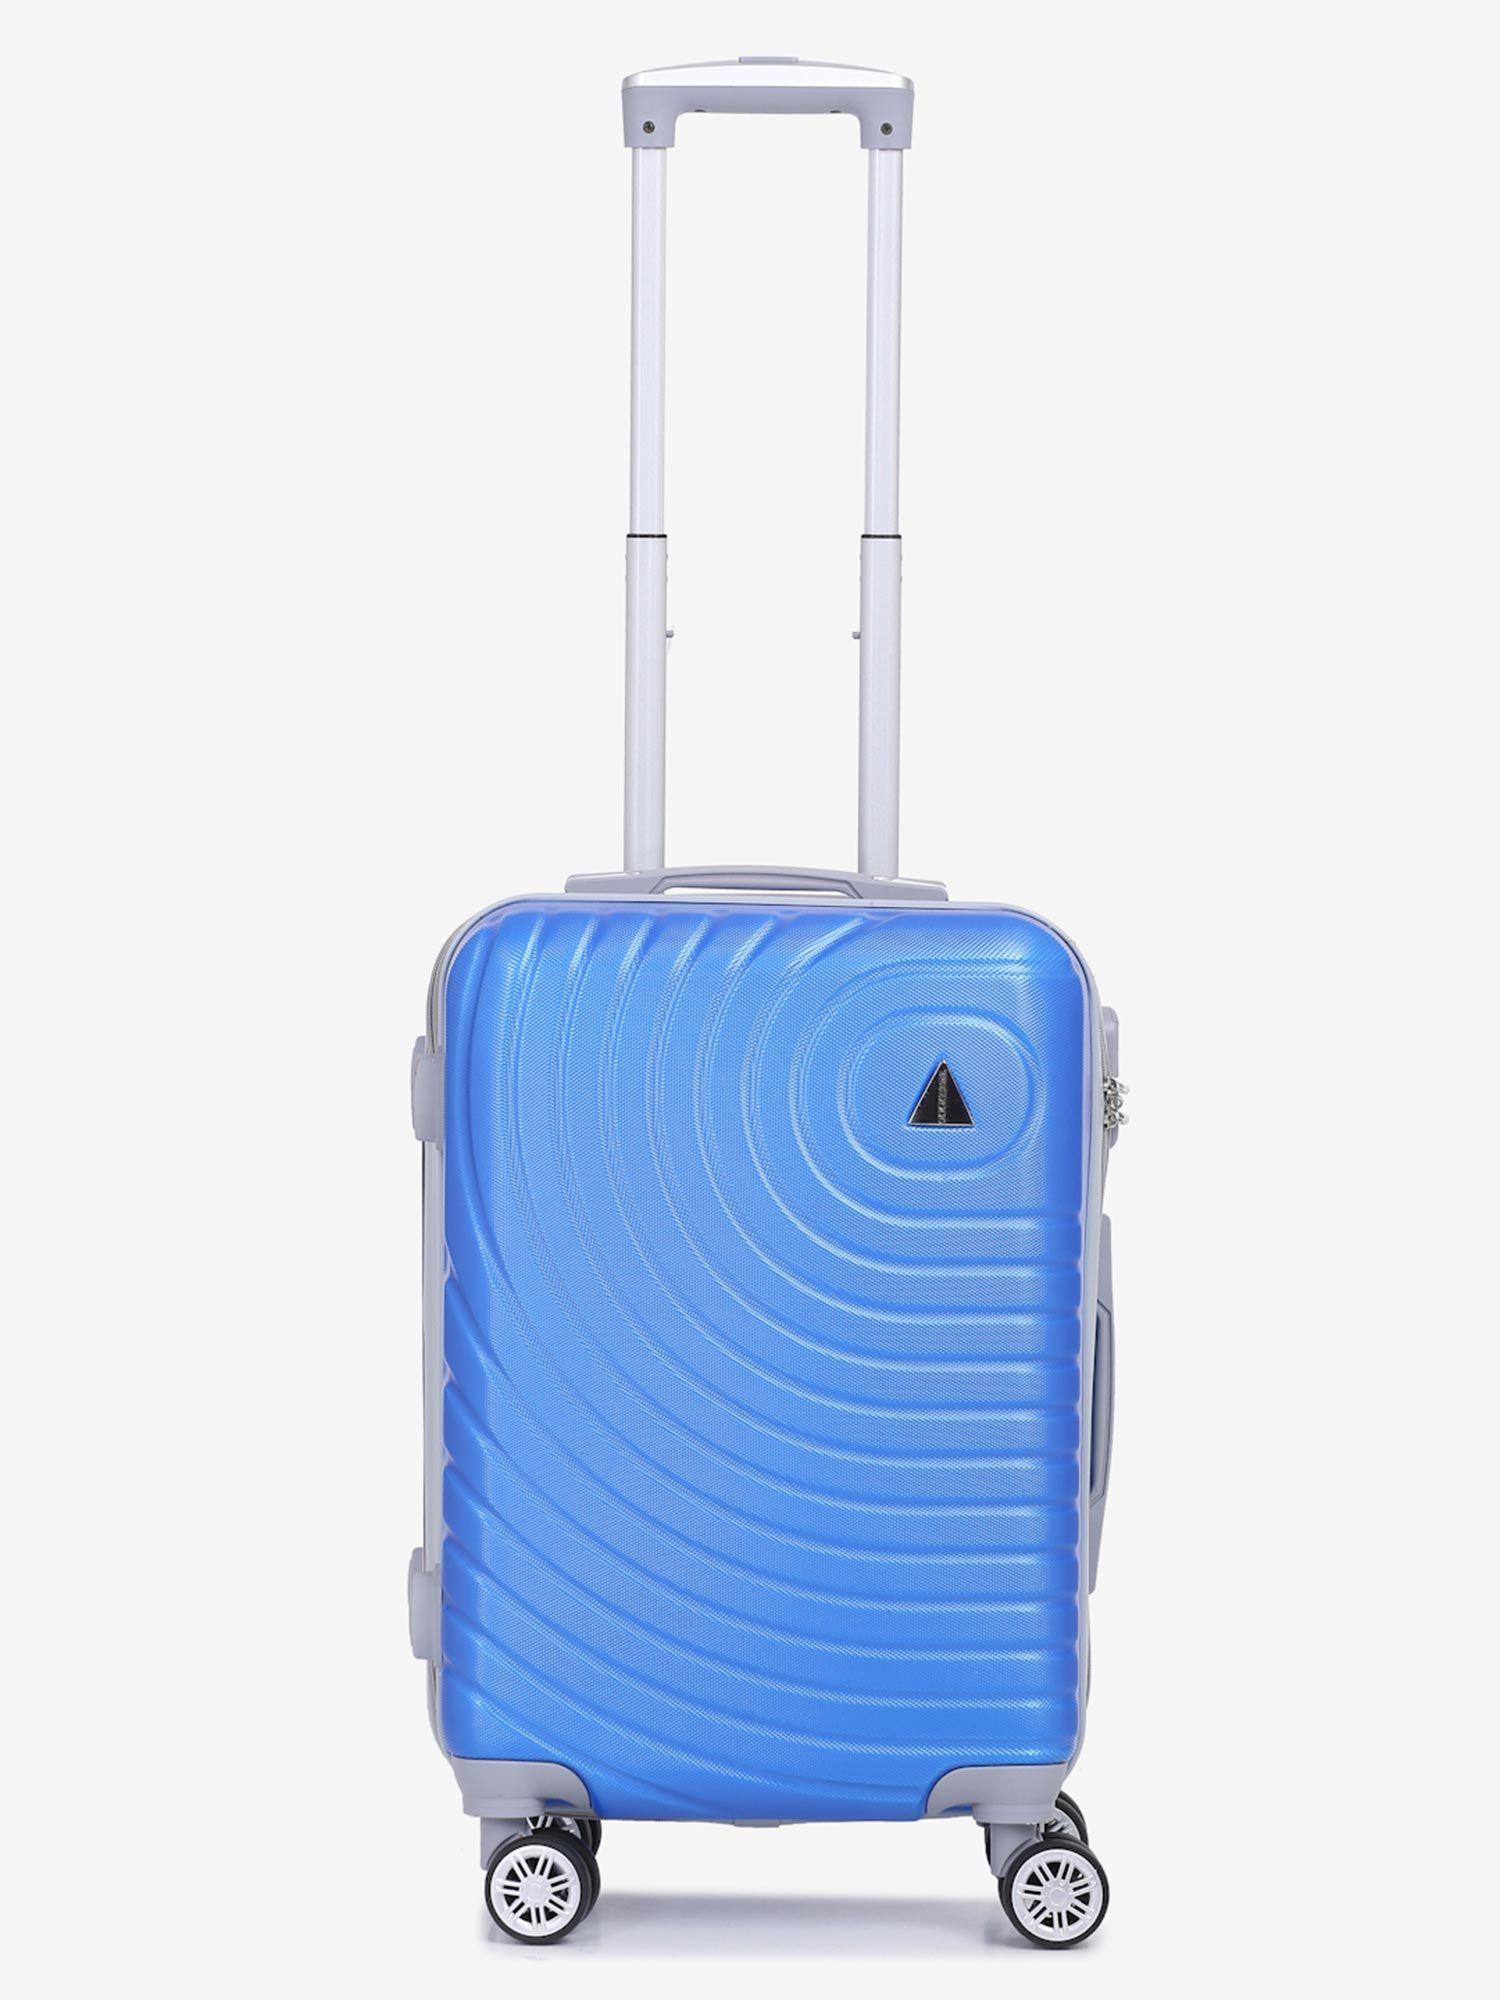 unisex blue textured hard-sided cabin trolley suitcase